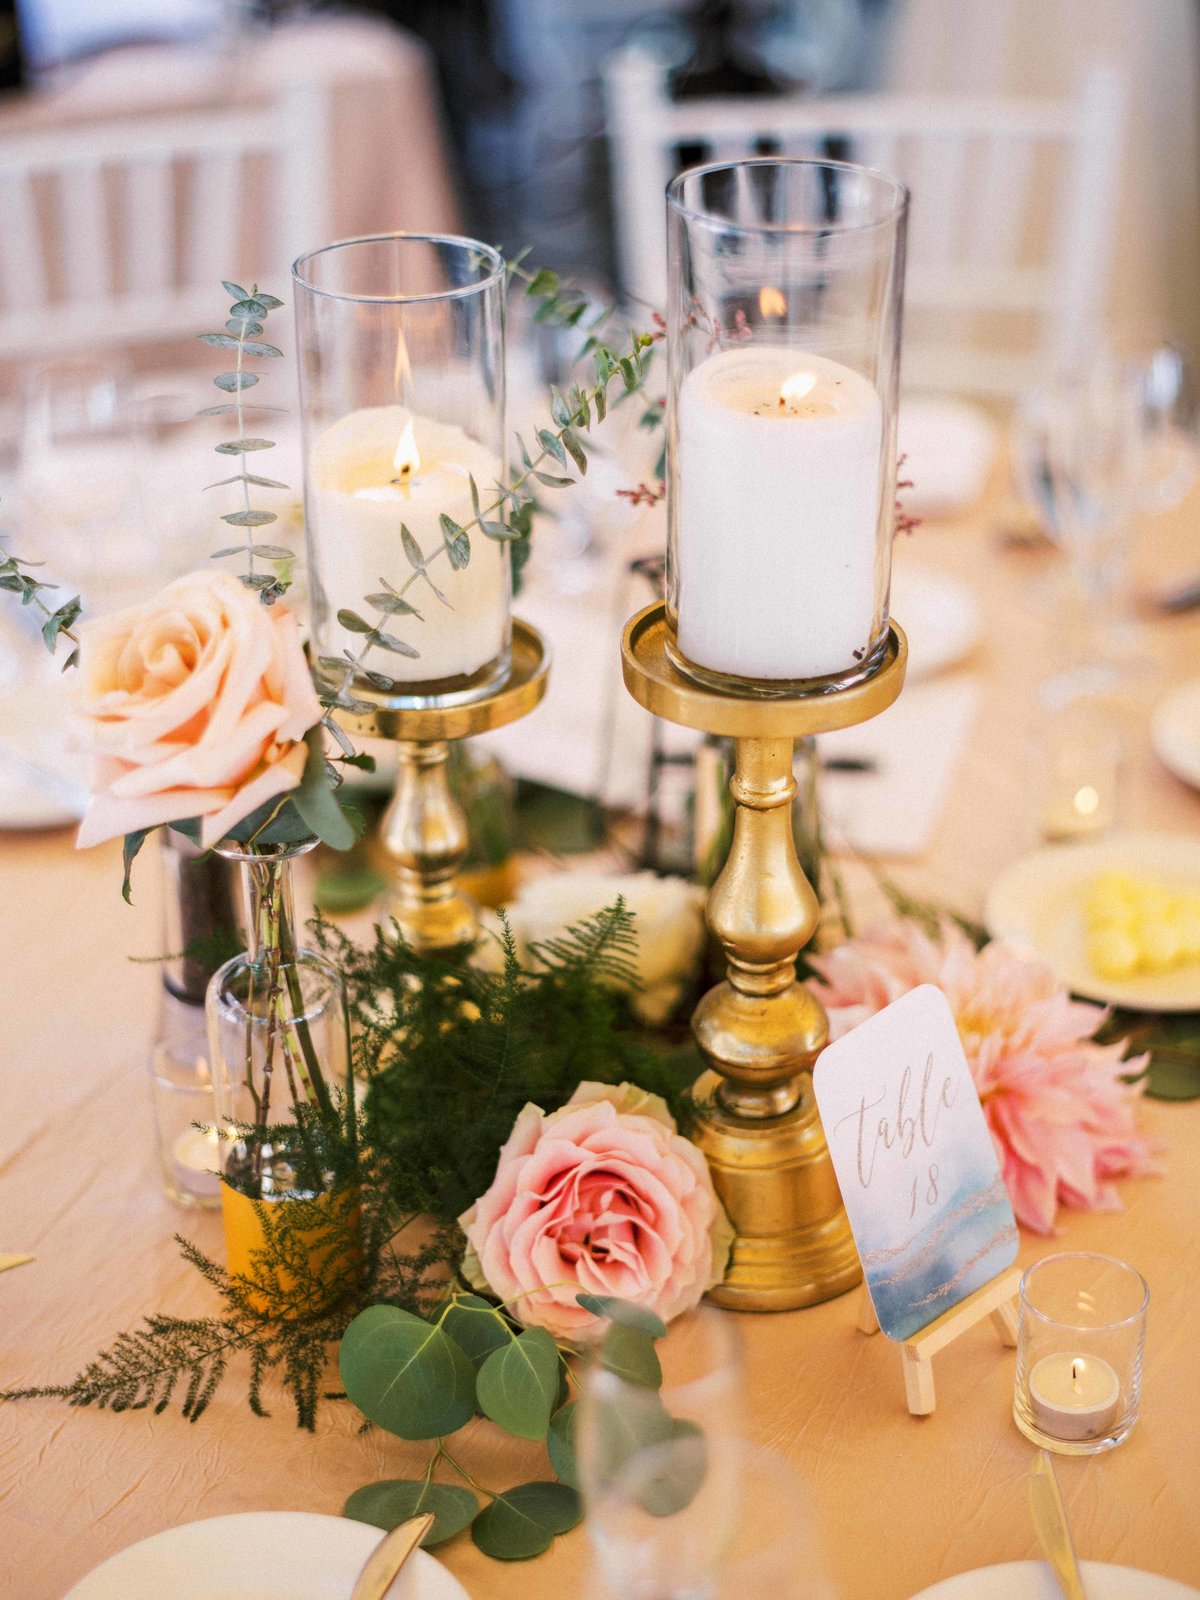 Bud vases and gold pillar candles are nestled into greenery and flowers